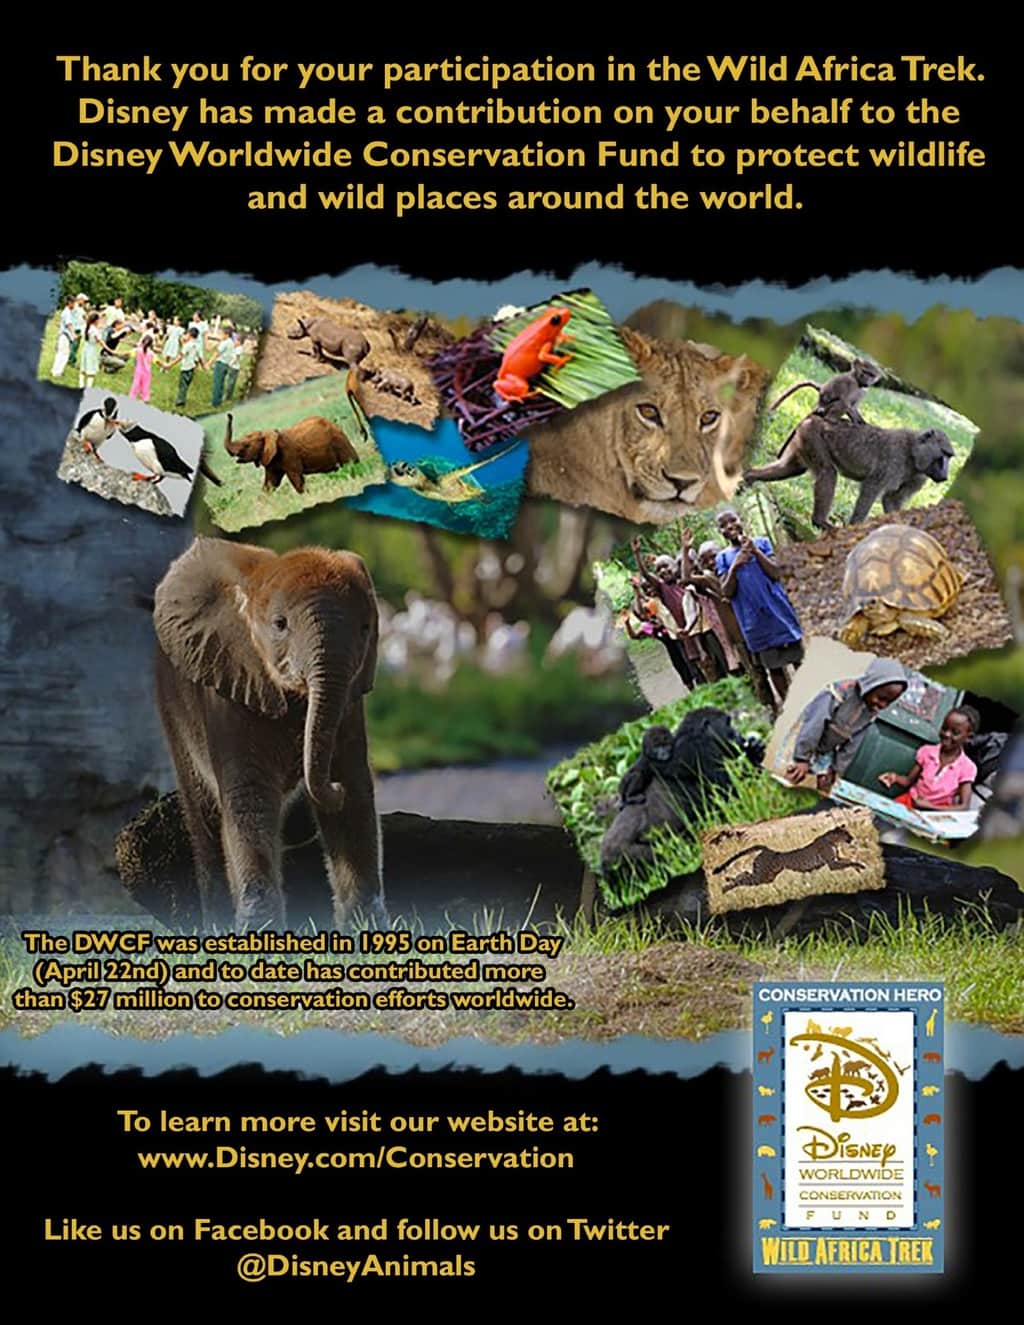 Disney's Animal Kingdom Wild Africa Trek is a VIP guided tour of the Kilimanjaro Safari. Though it is an additional fee, the experience is exceptional, even including a traditional African meal eaten in a Boma.